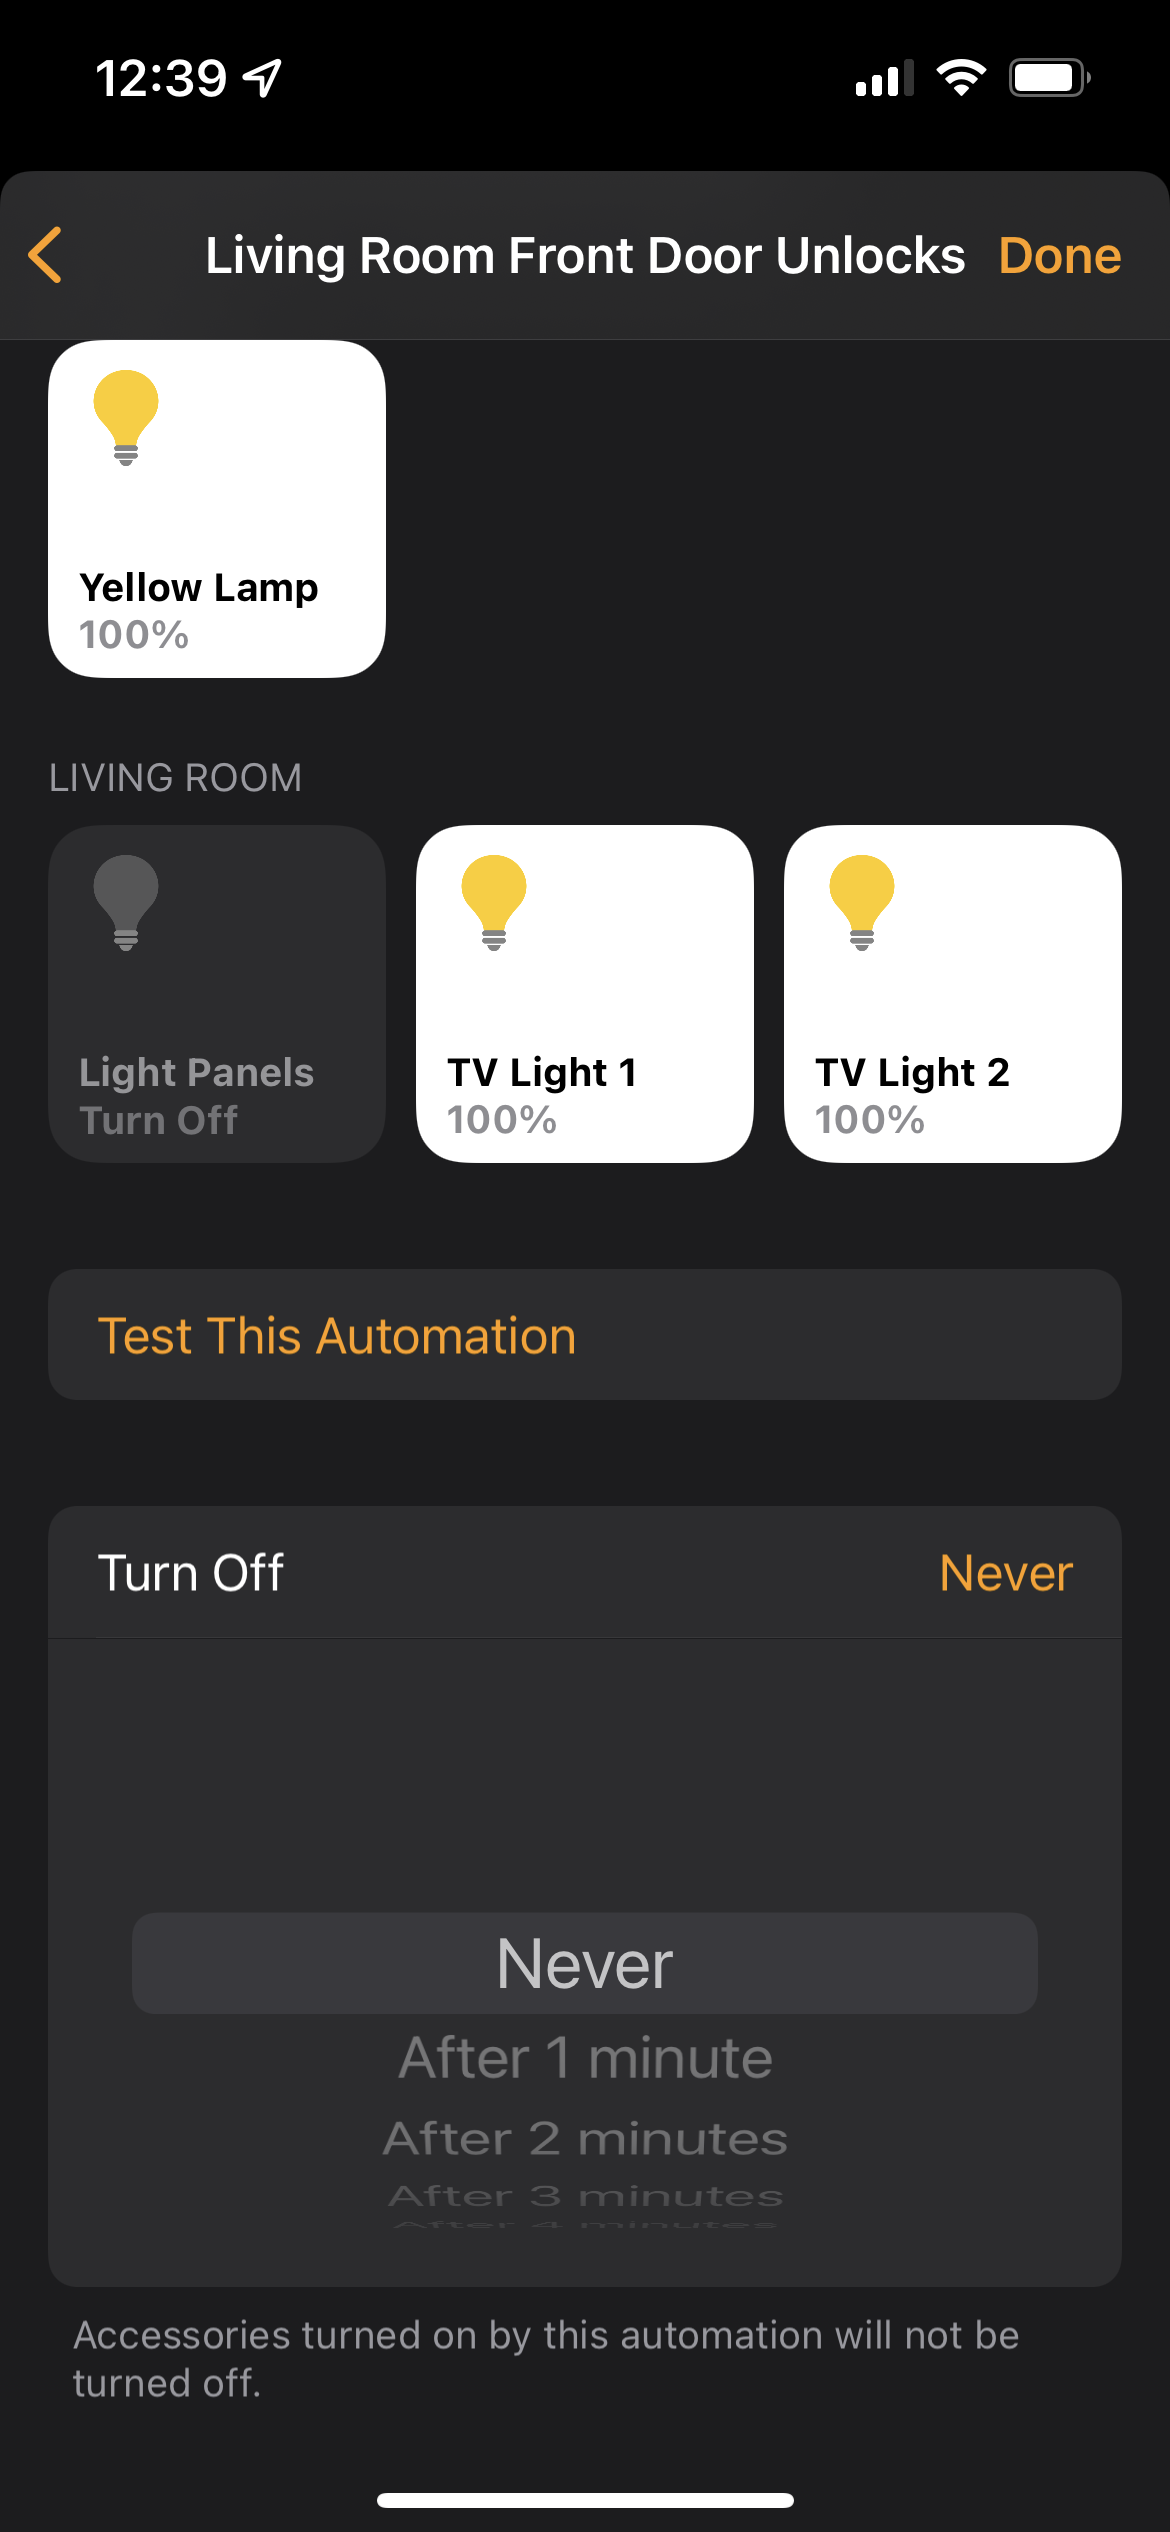 Setting up actions for a HomeKit automation